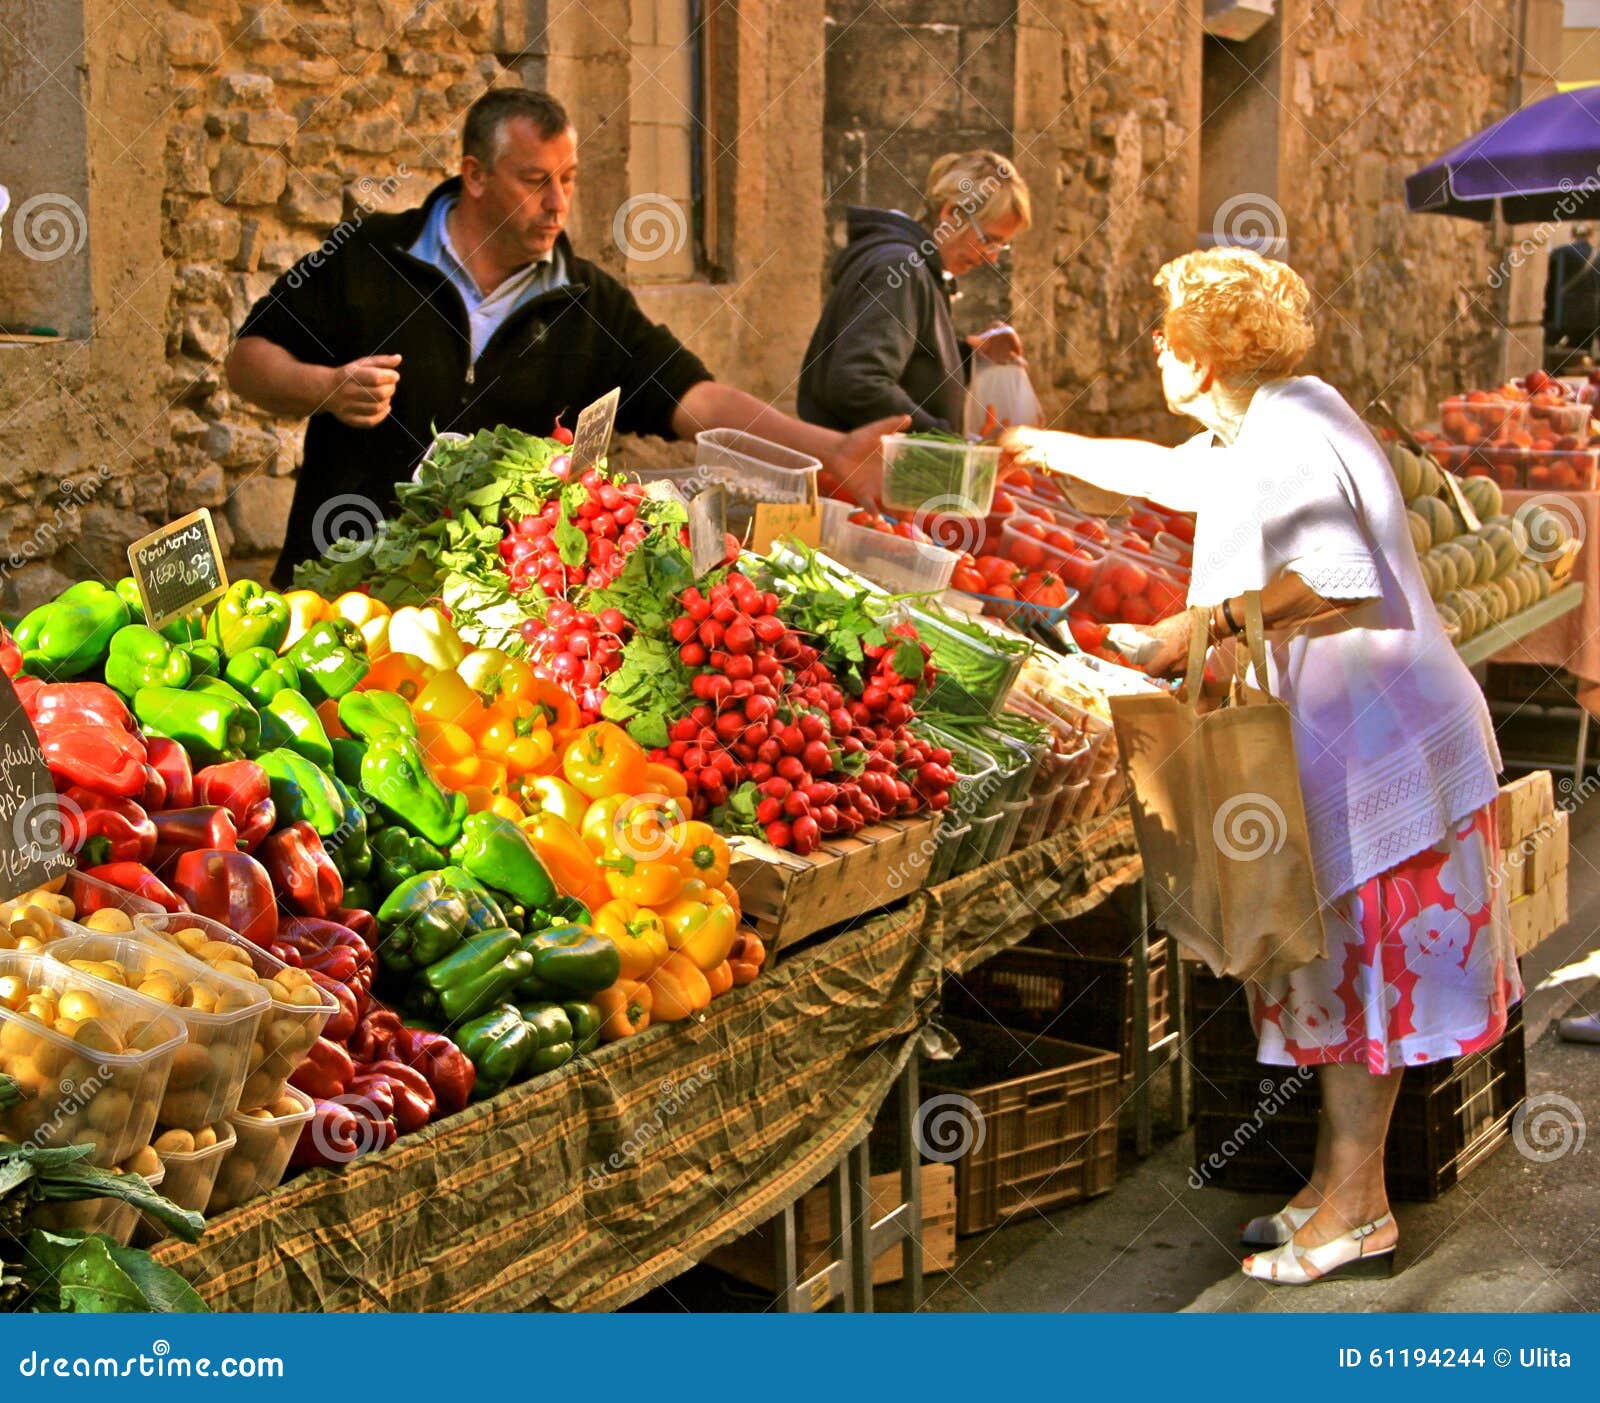 Aix-en-Provence Weekly Farmers Market — The Meaningful 